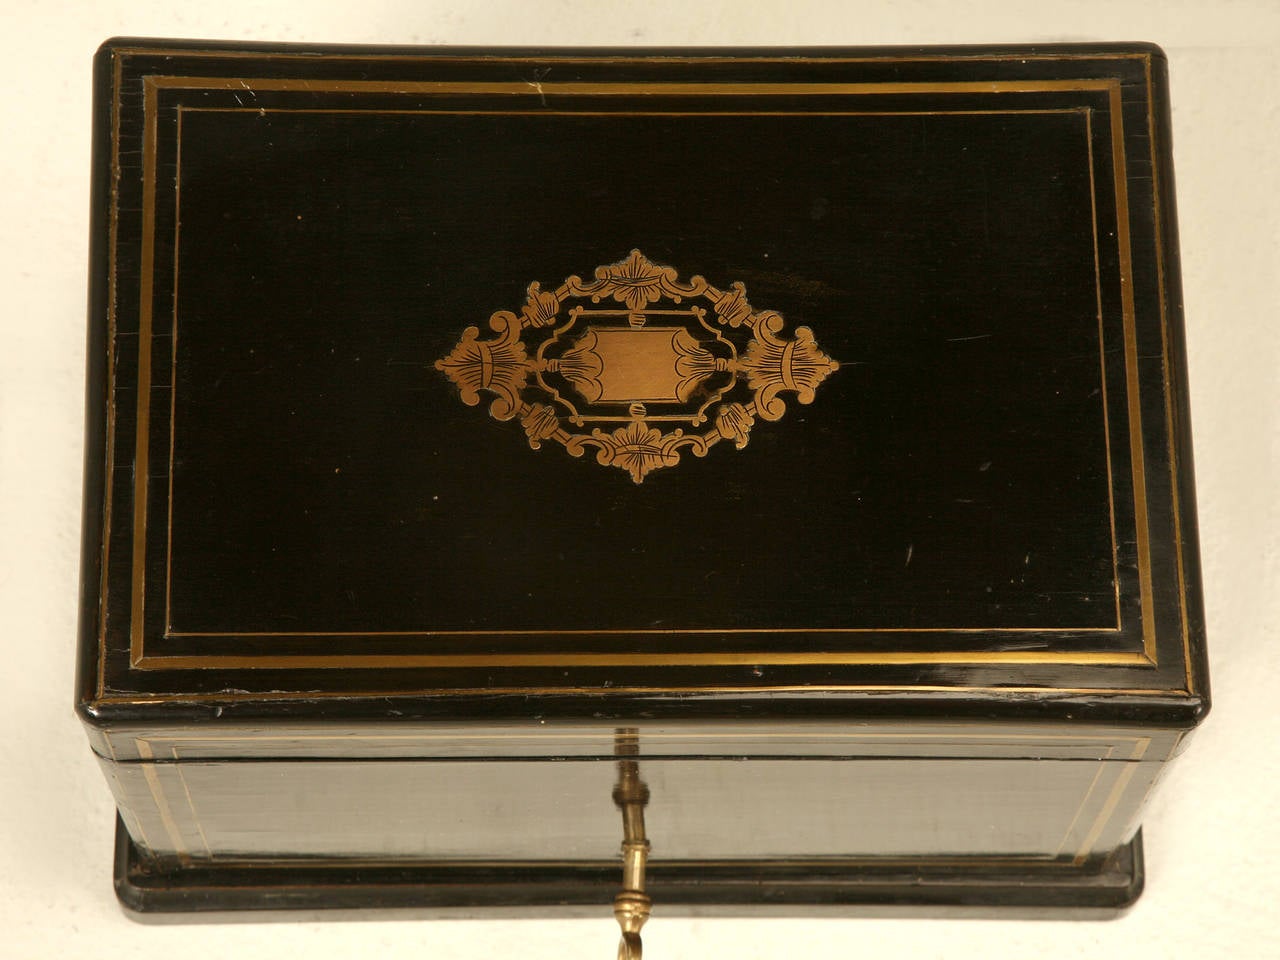 Antique French black lacquer and brass Humidor. Beautifully constructed with a mahogany interior and intricate brass inlays. The condition appears to be all original and would indicate it was well loved for the last 100 years. Hard to believe it